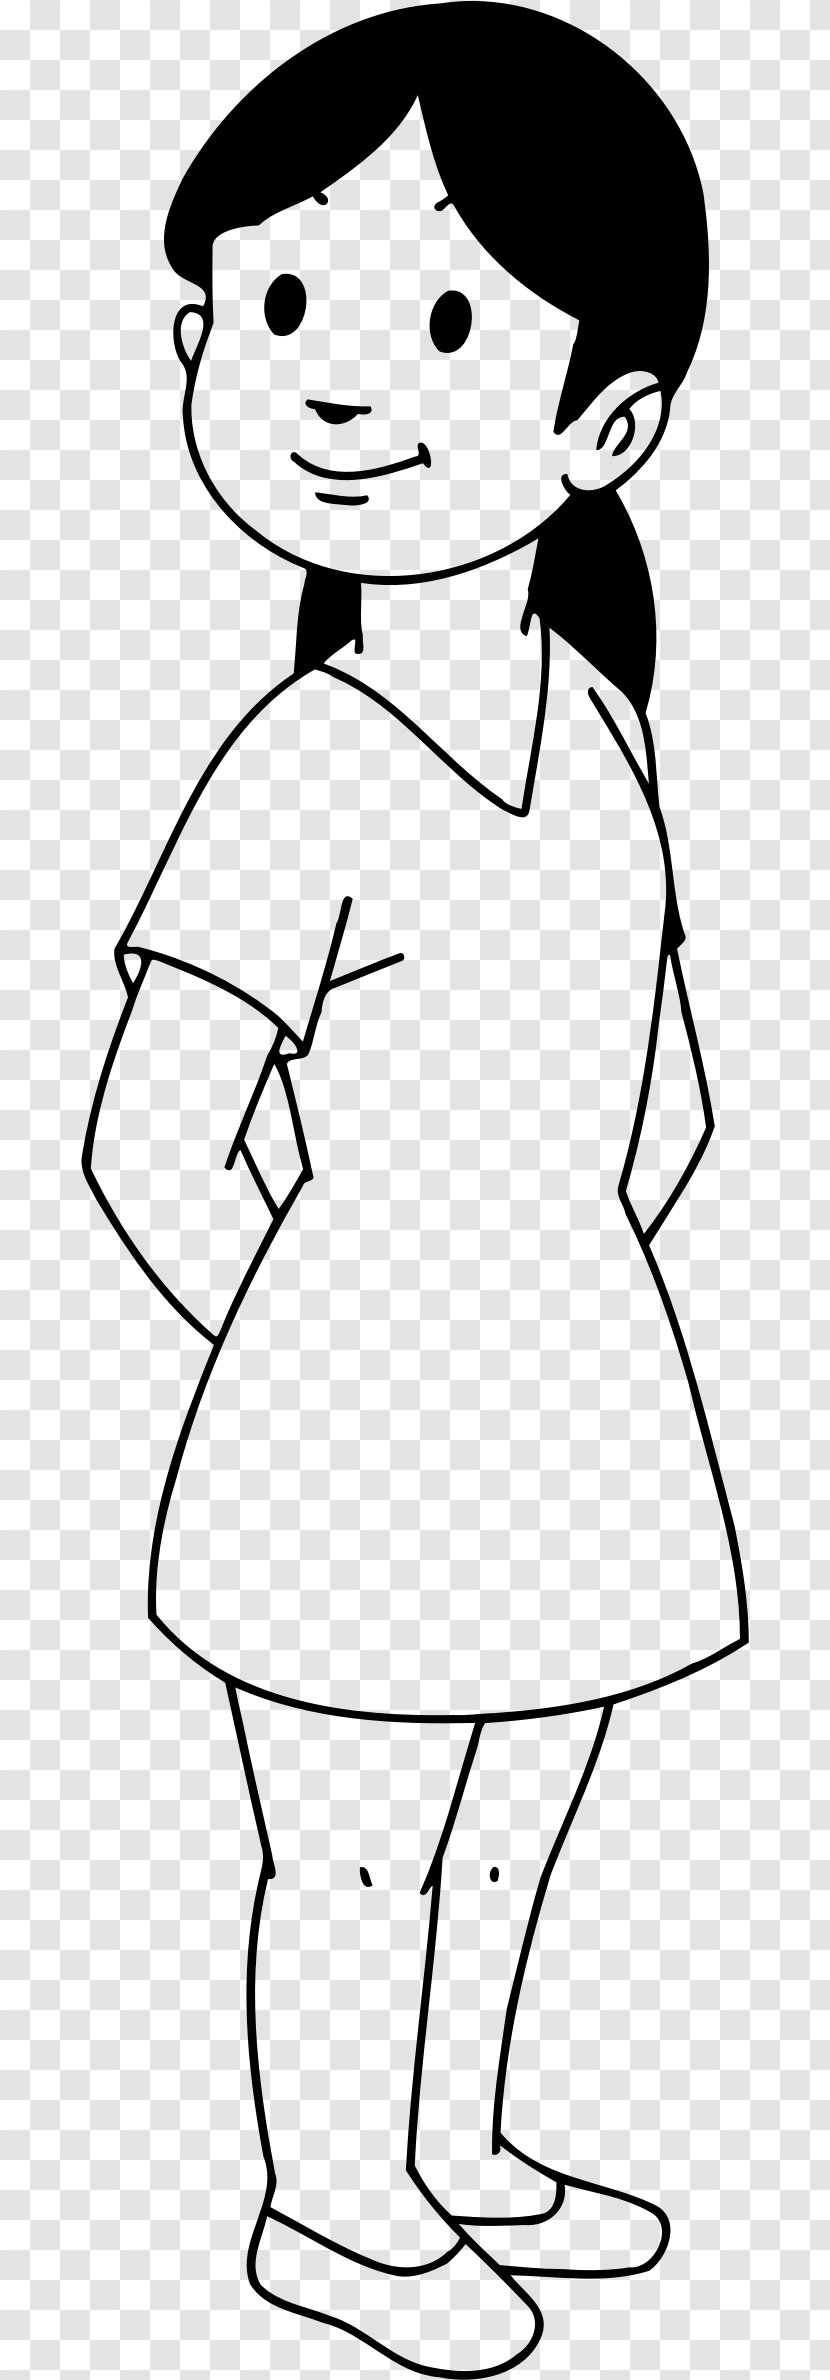 Line Art Child Drawing Woman Clip - Silhouette Transparent PNG